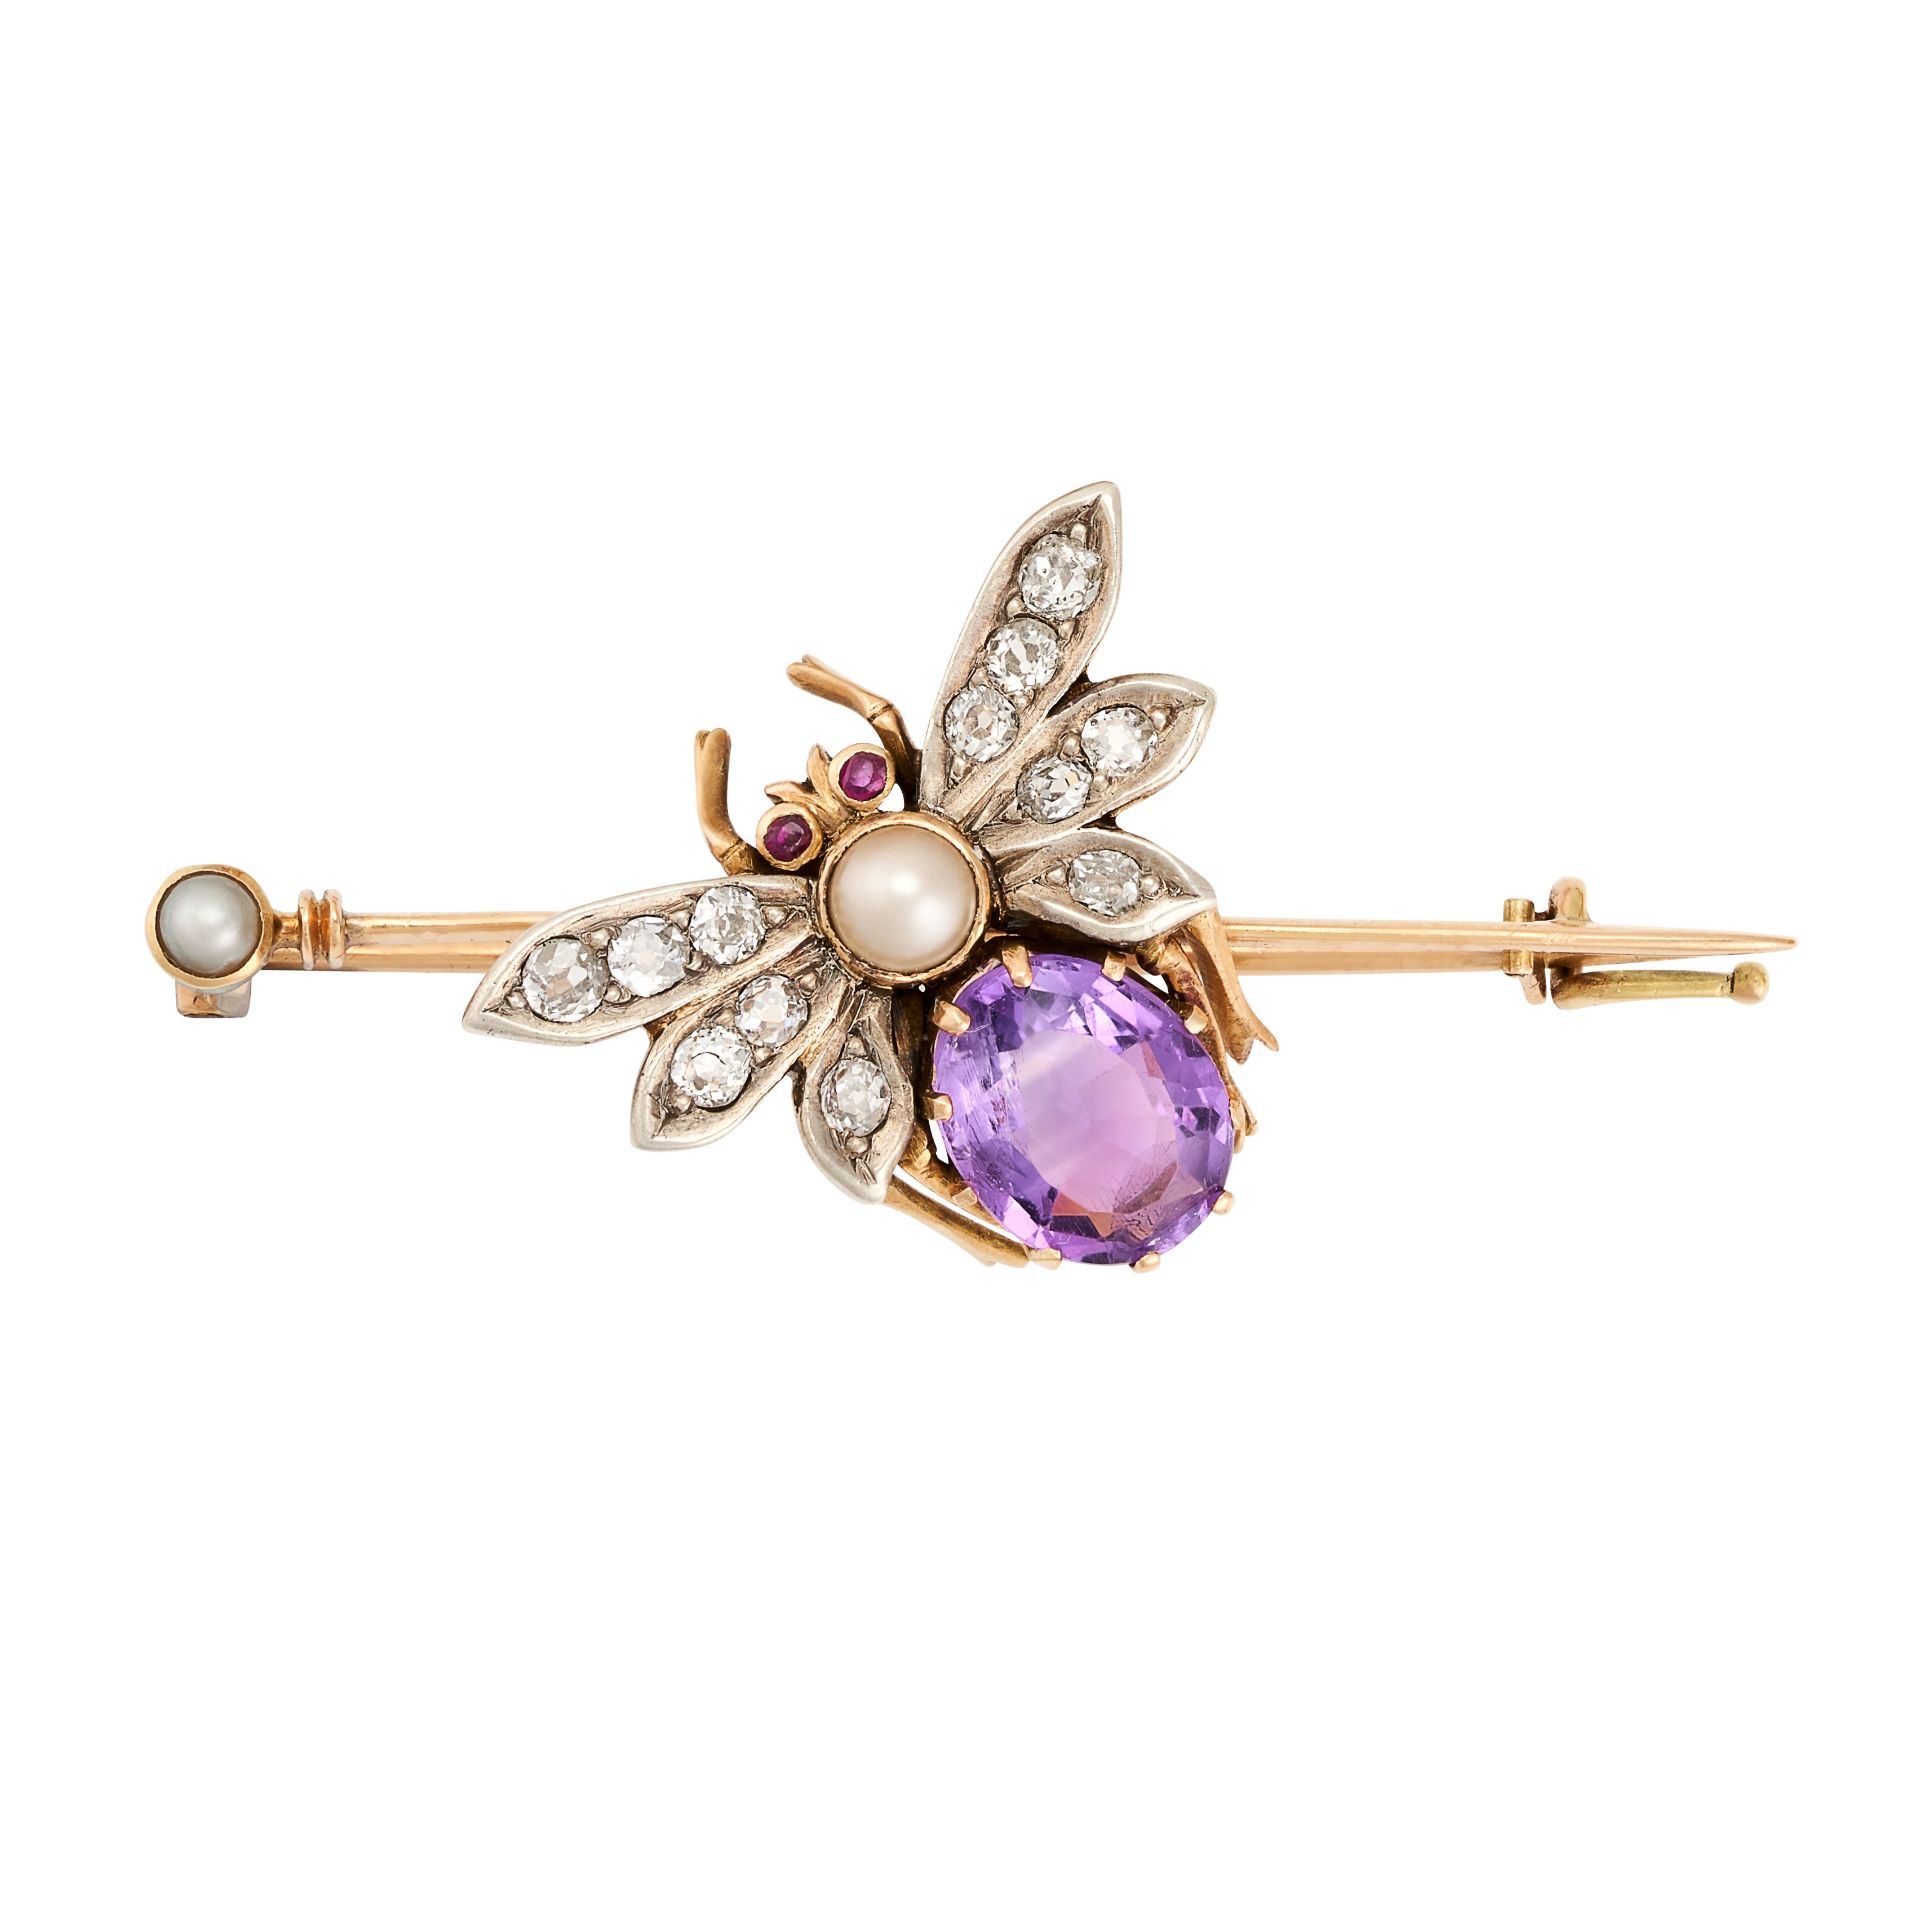 AN ANTIQUE AMETHYST, PEARL, DIAMOND AND RUBY FLY BROOCH in yellow gold and silver, designed as an